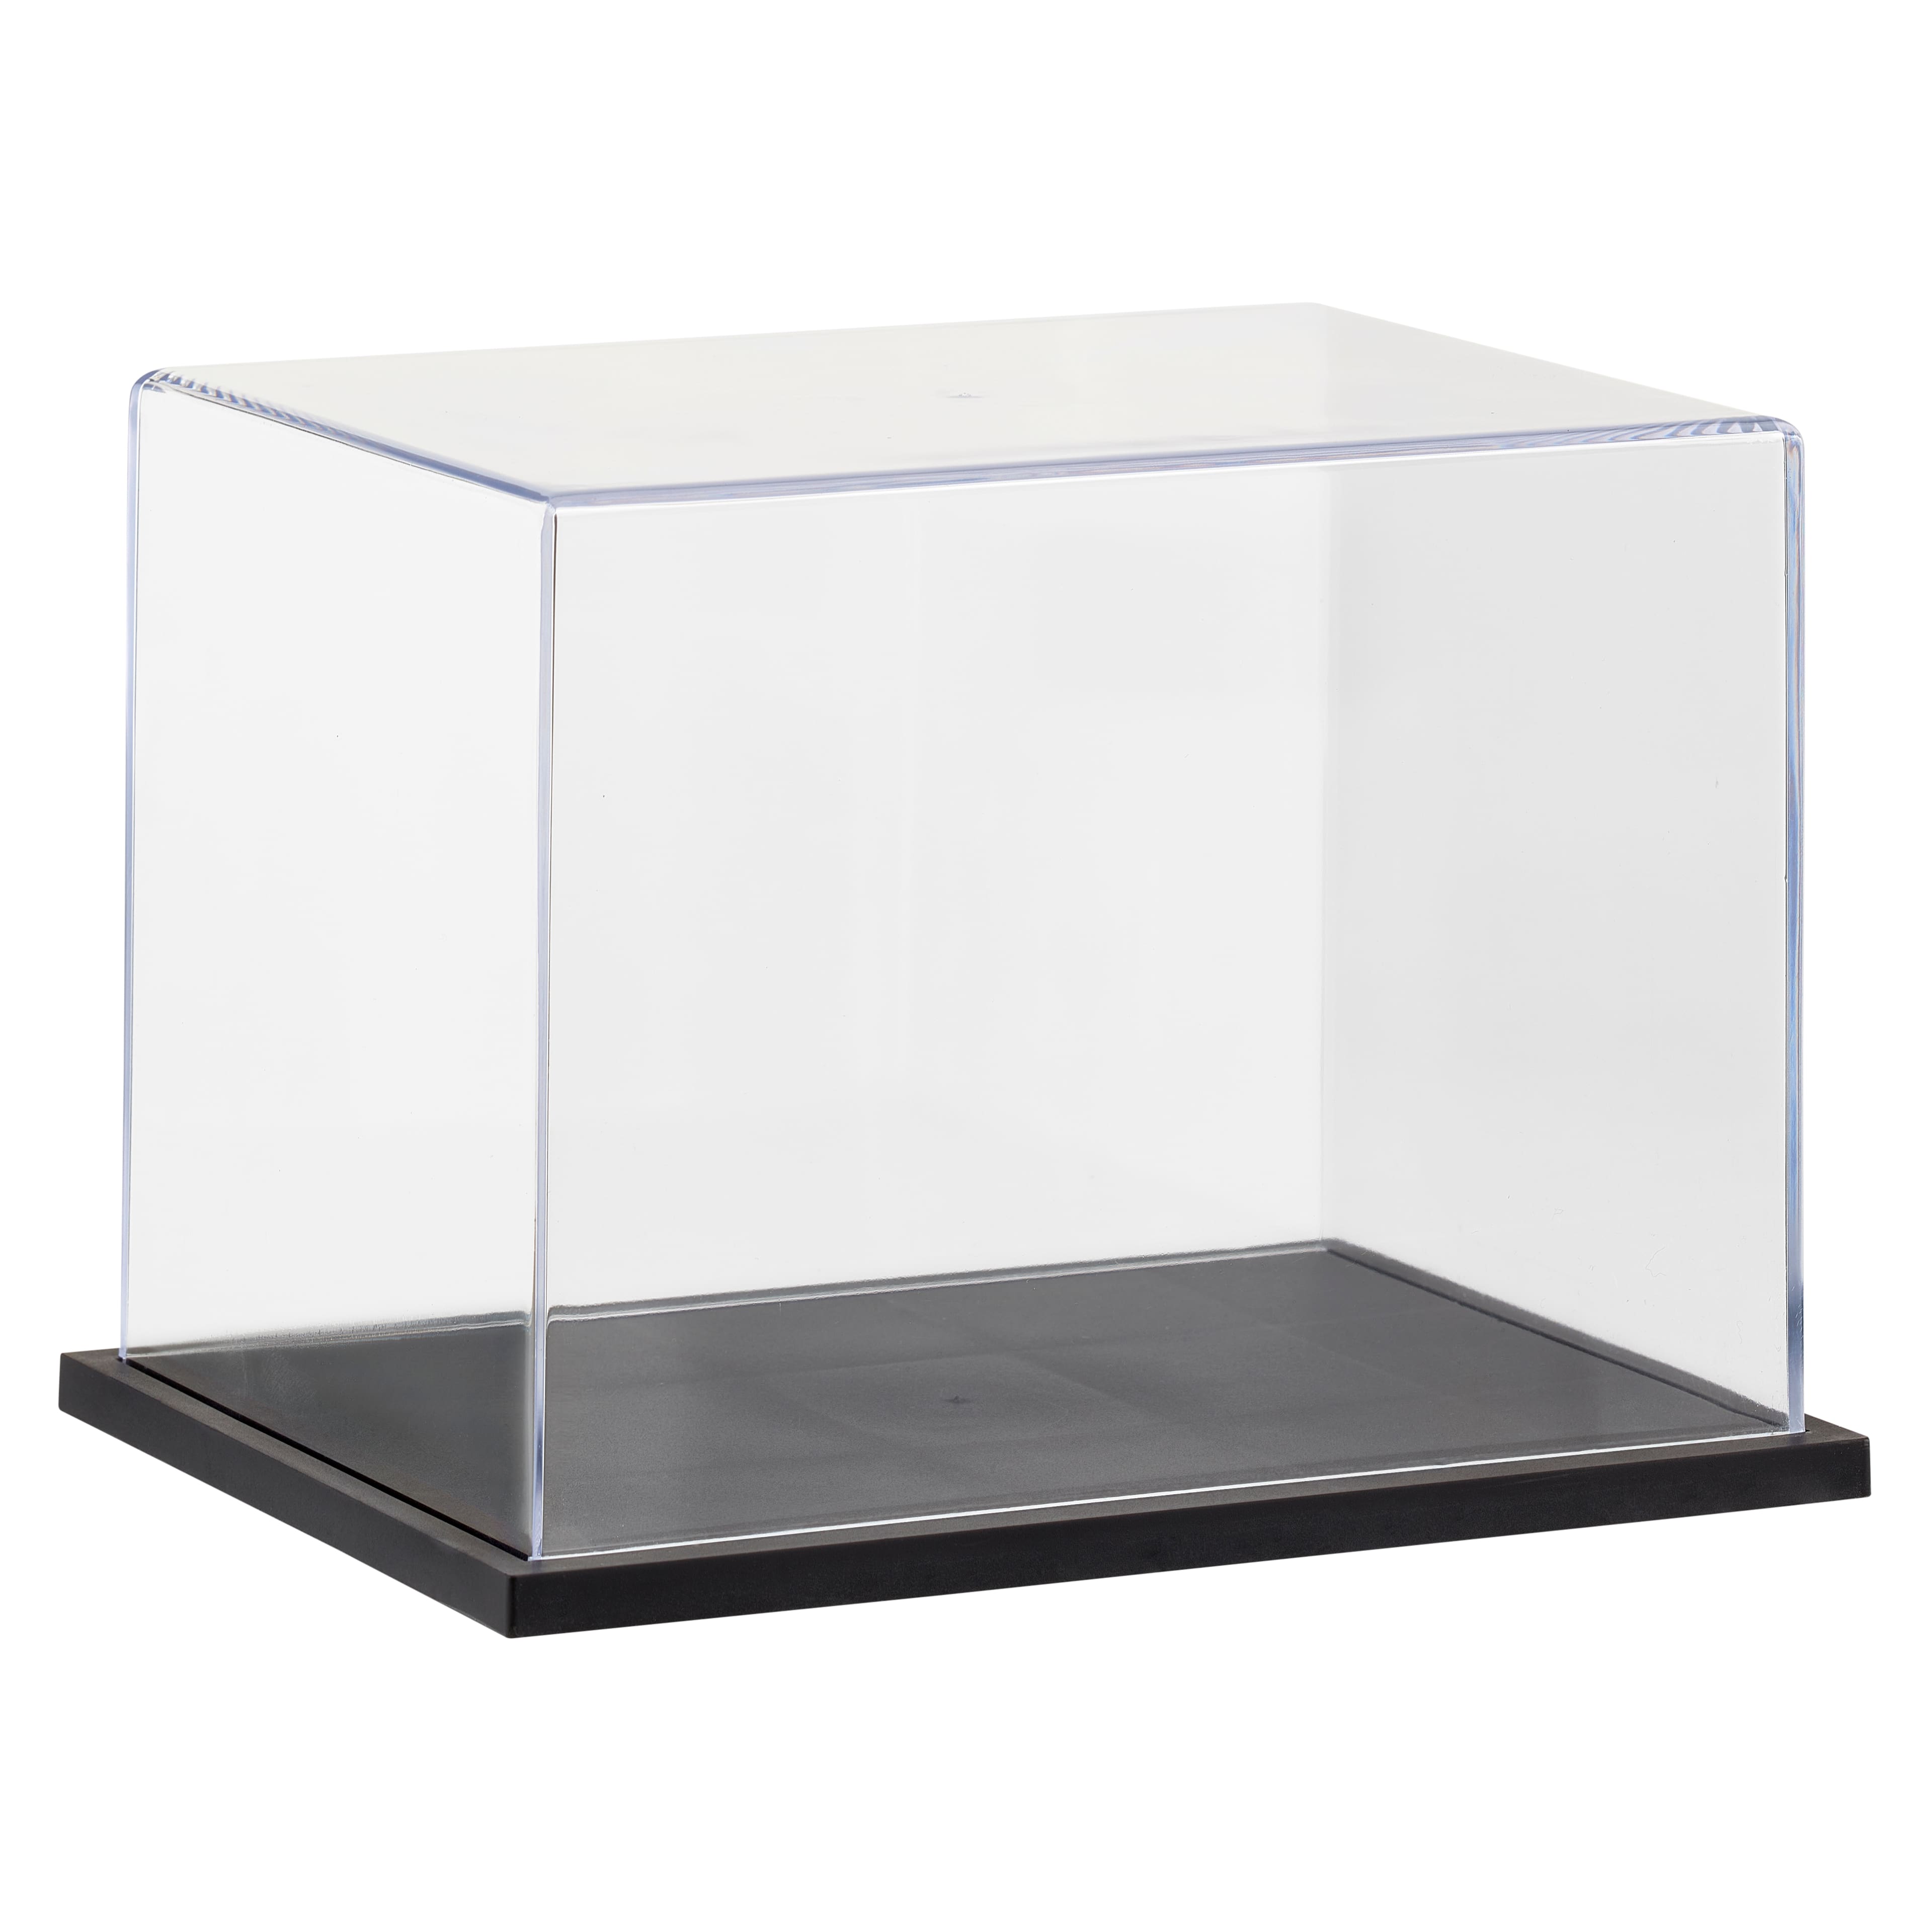 School Display Cases - The Tablet & Ticket Co.